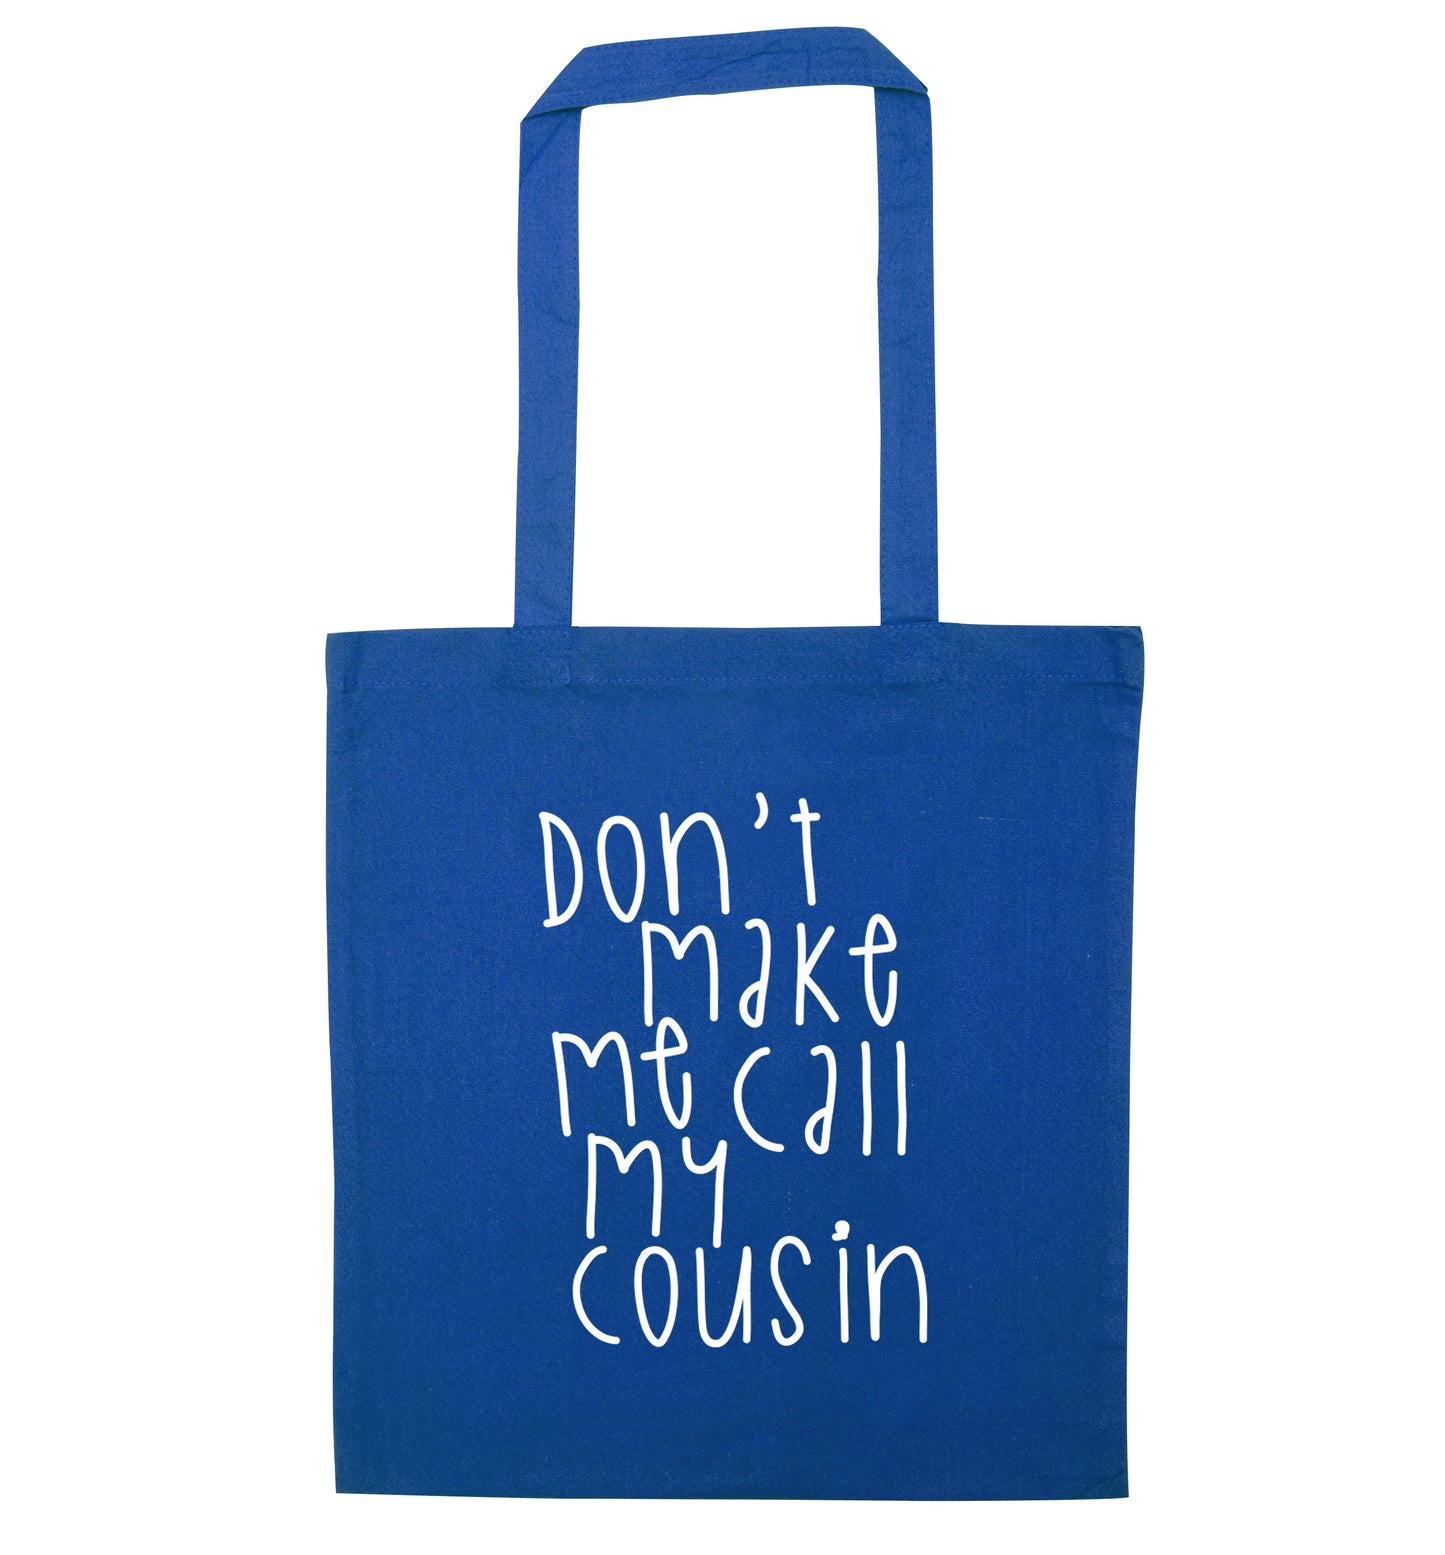 Don't make me call my cousin blue tote bag